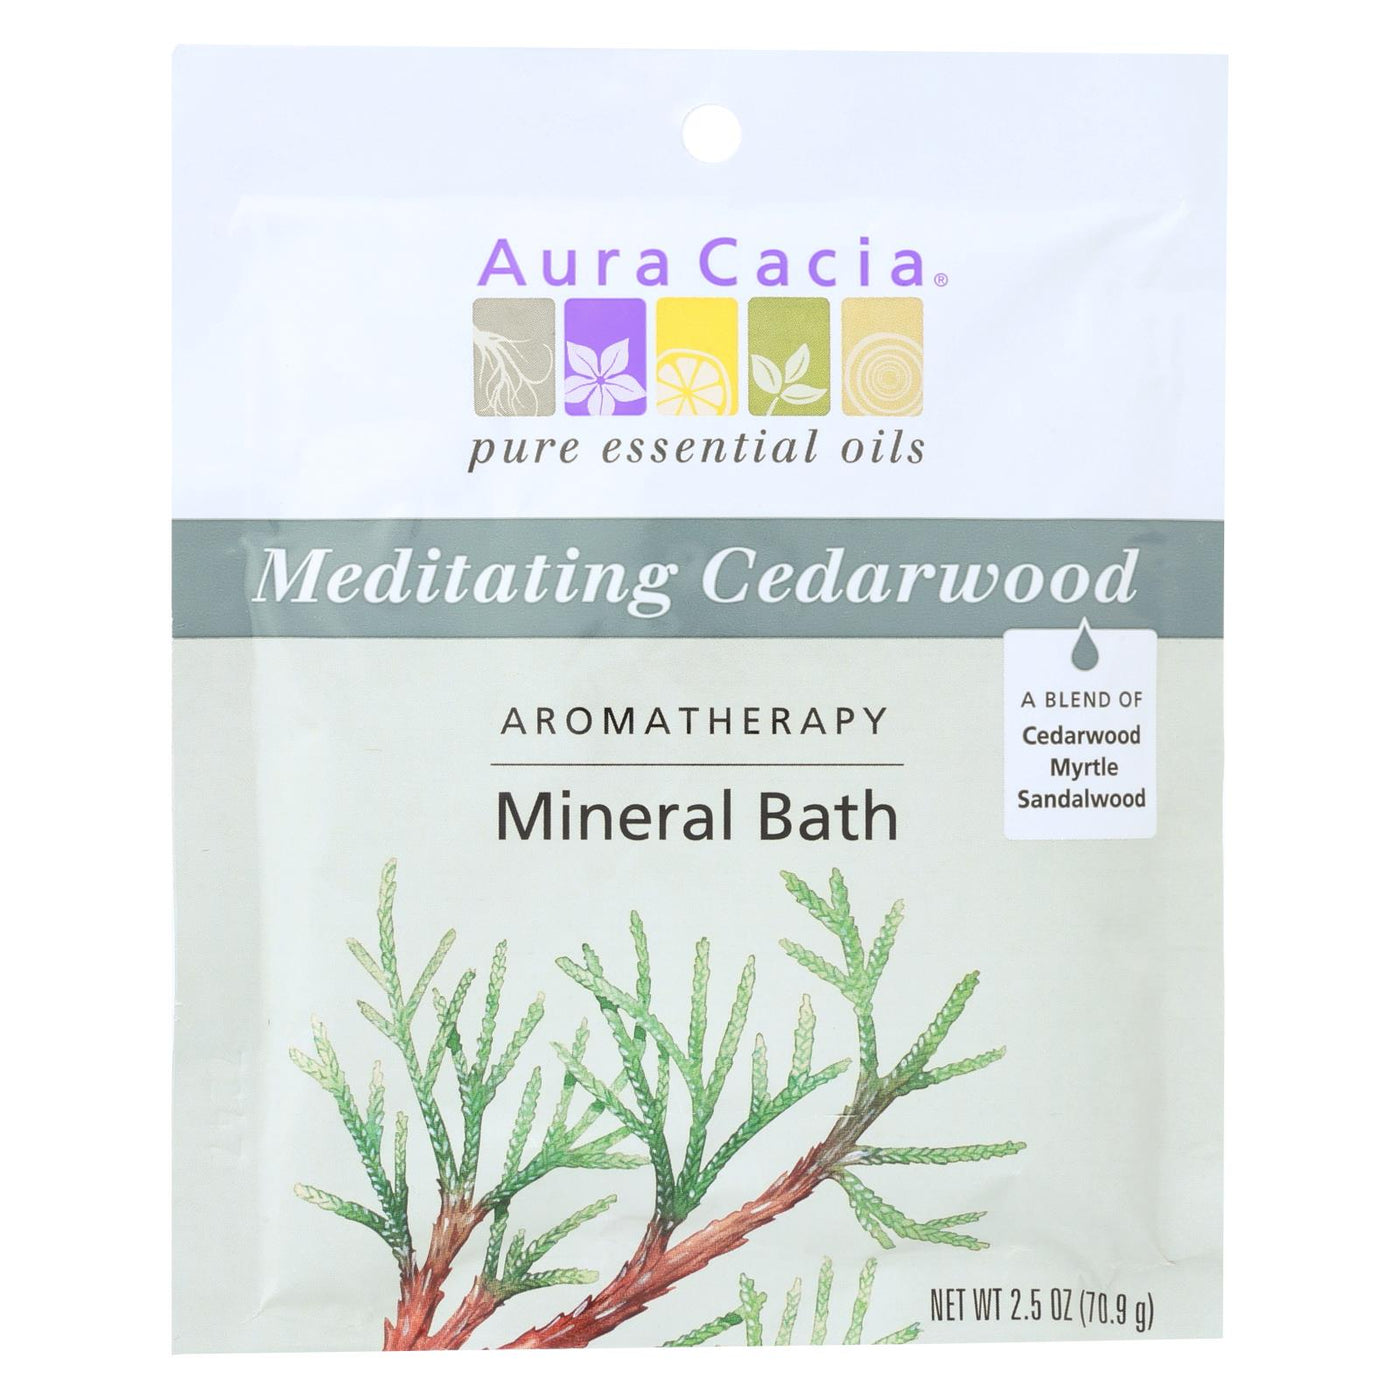 Aura Cacia - Aromatherapy Mineral Bath Meditation - 2.5 Oz - Case Of 6 - OnlyNaturals